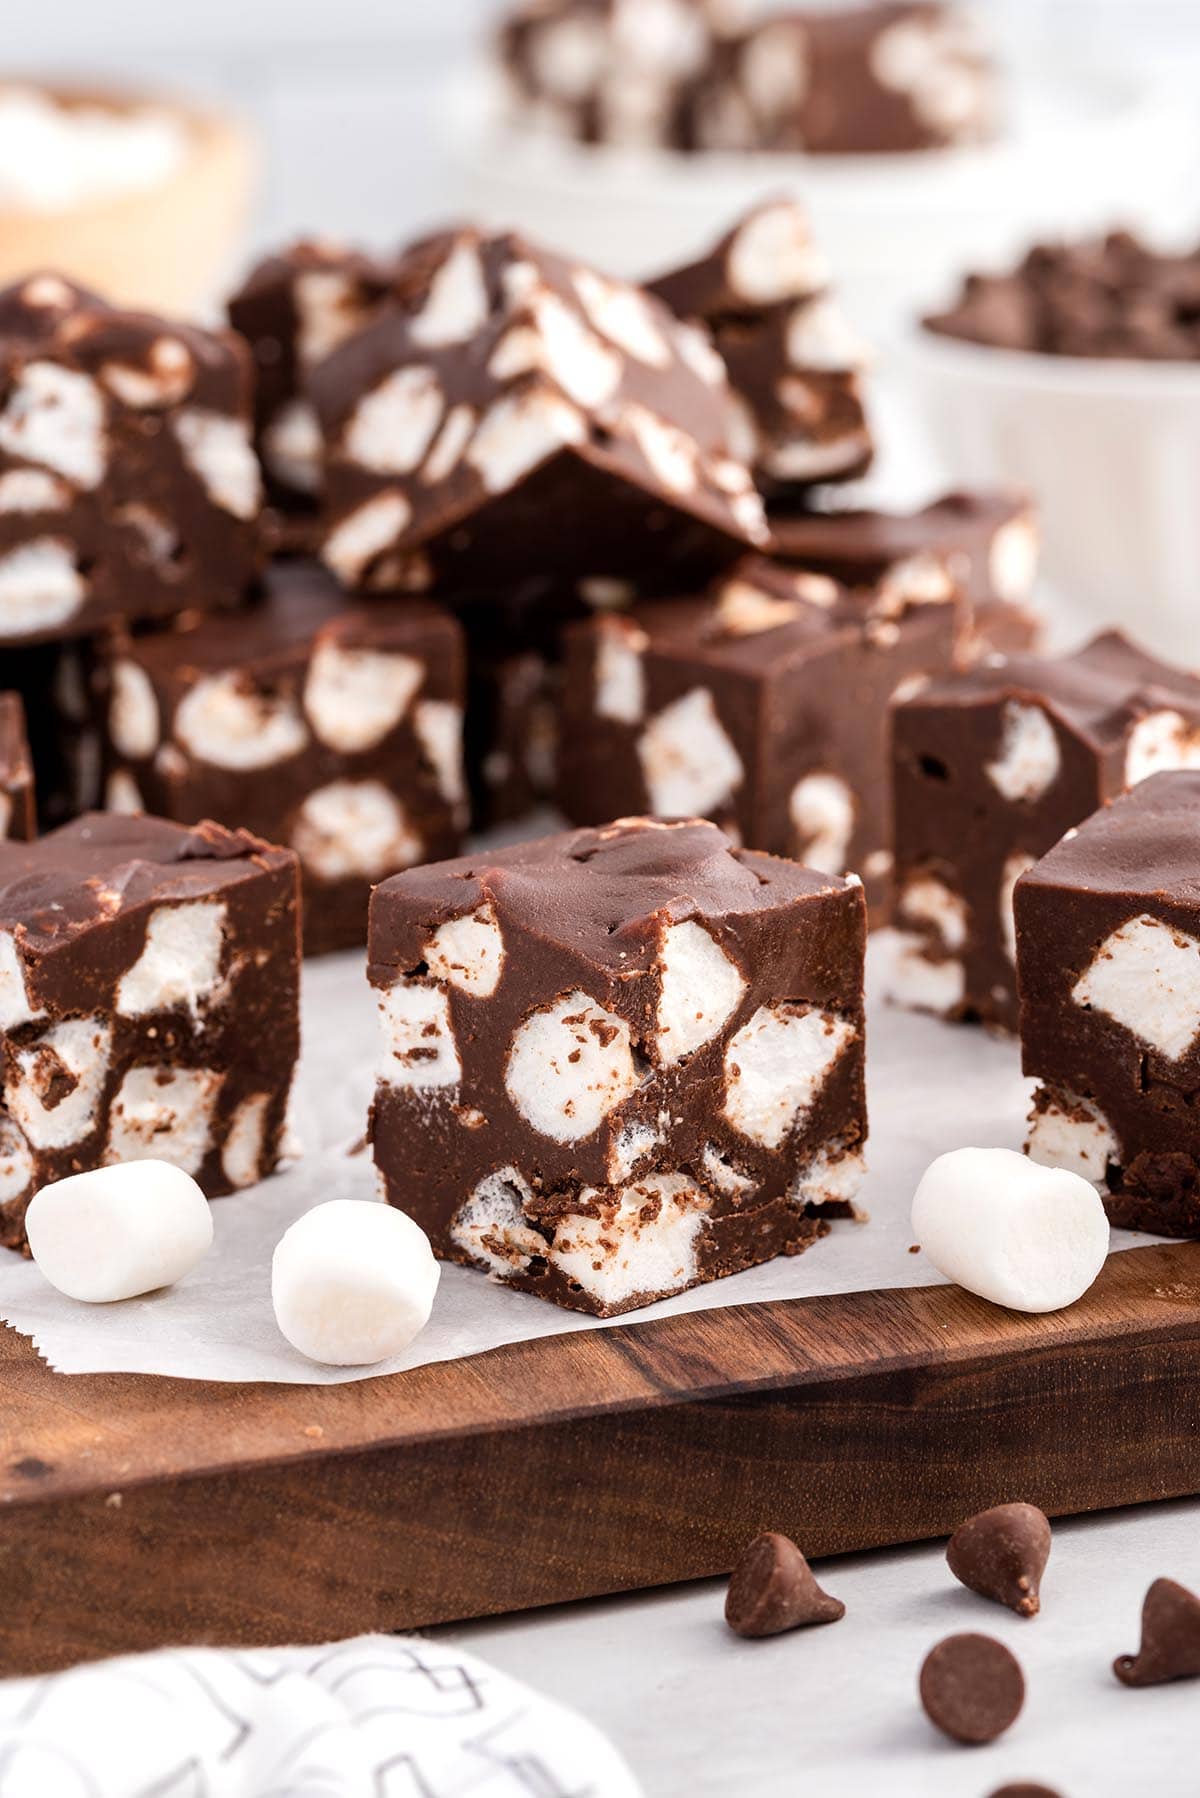 marshmallow fudge with chocolate chips